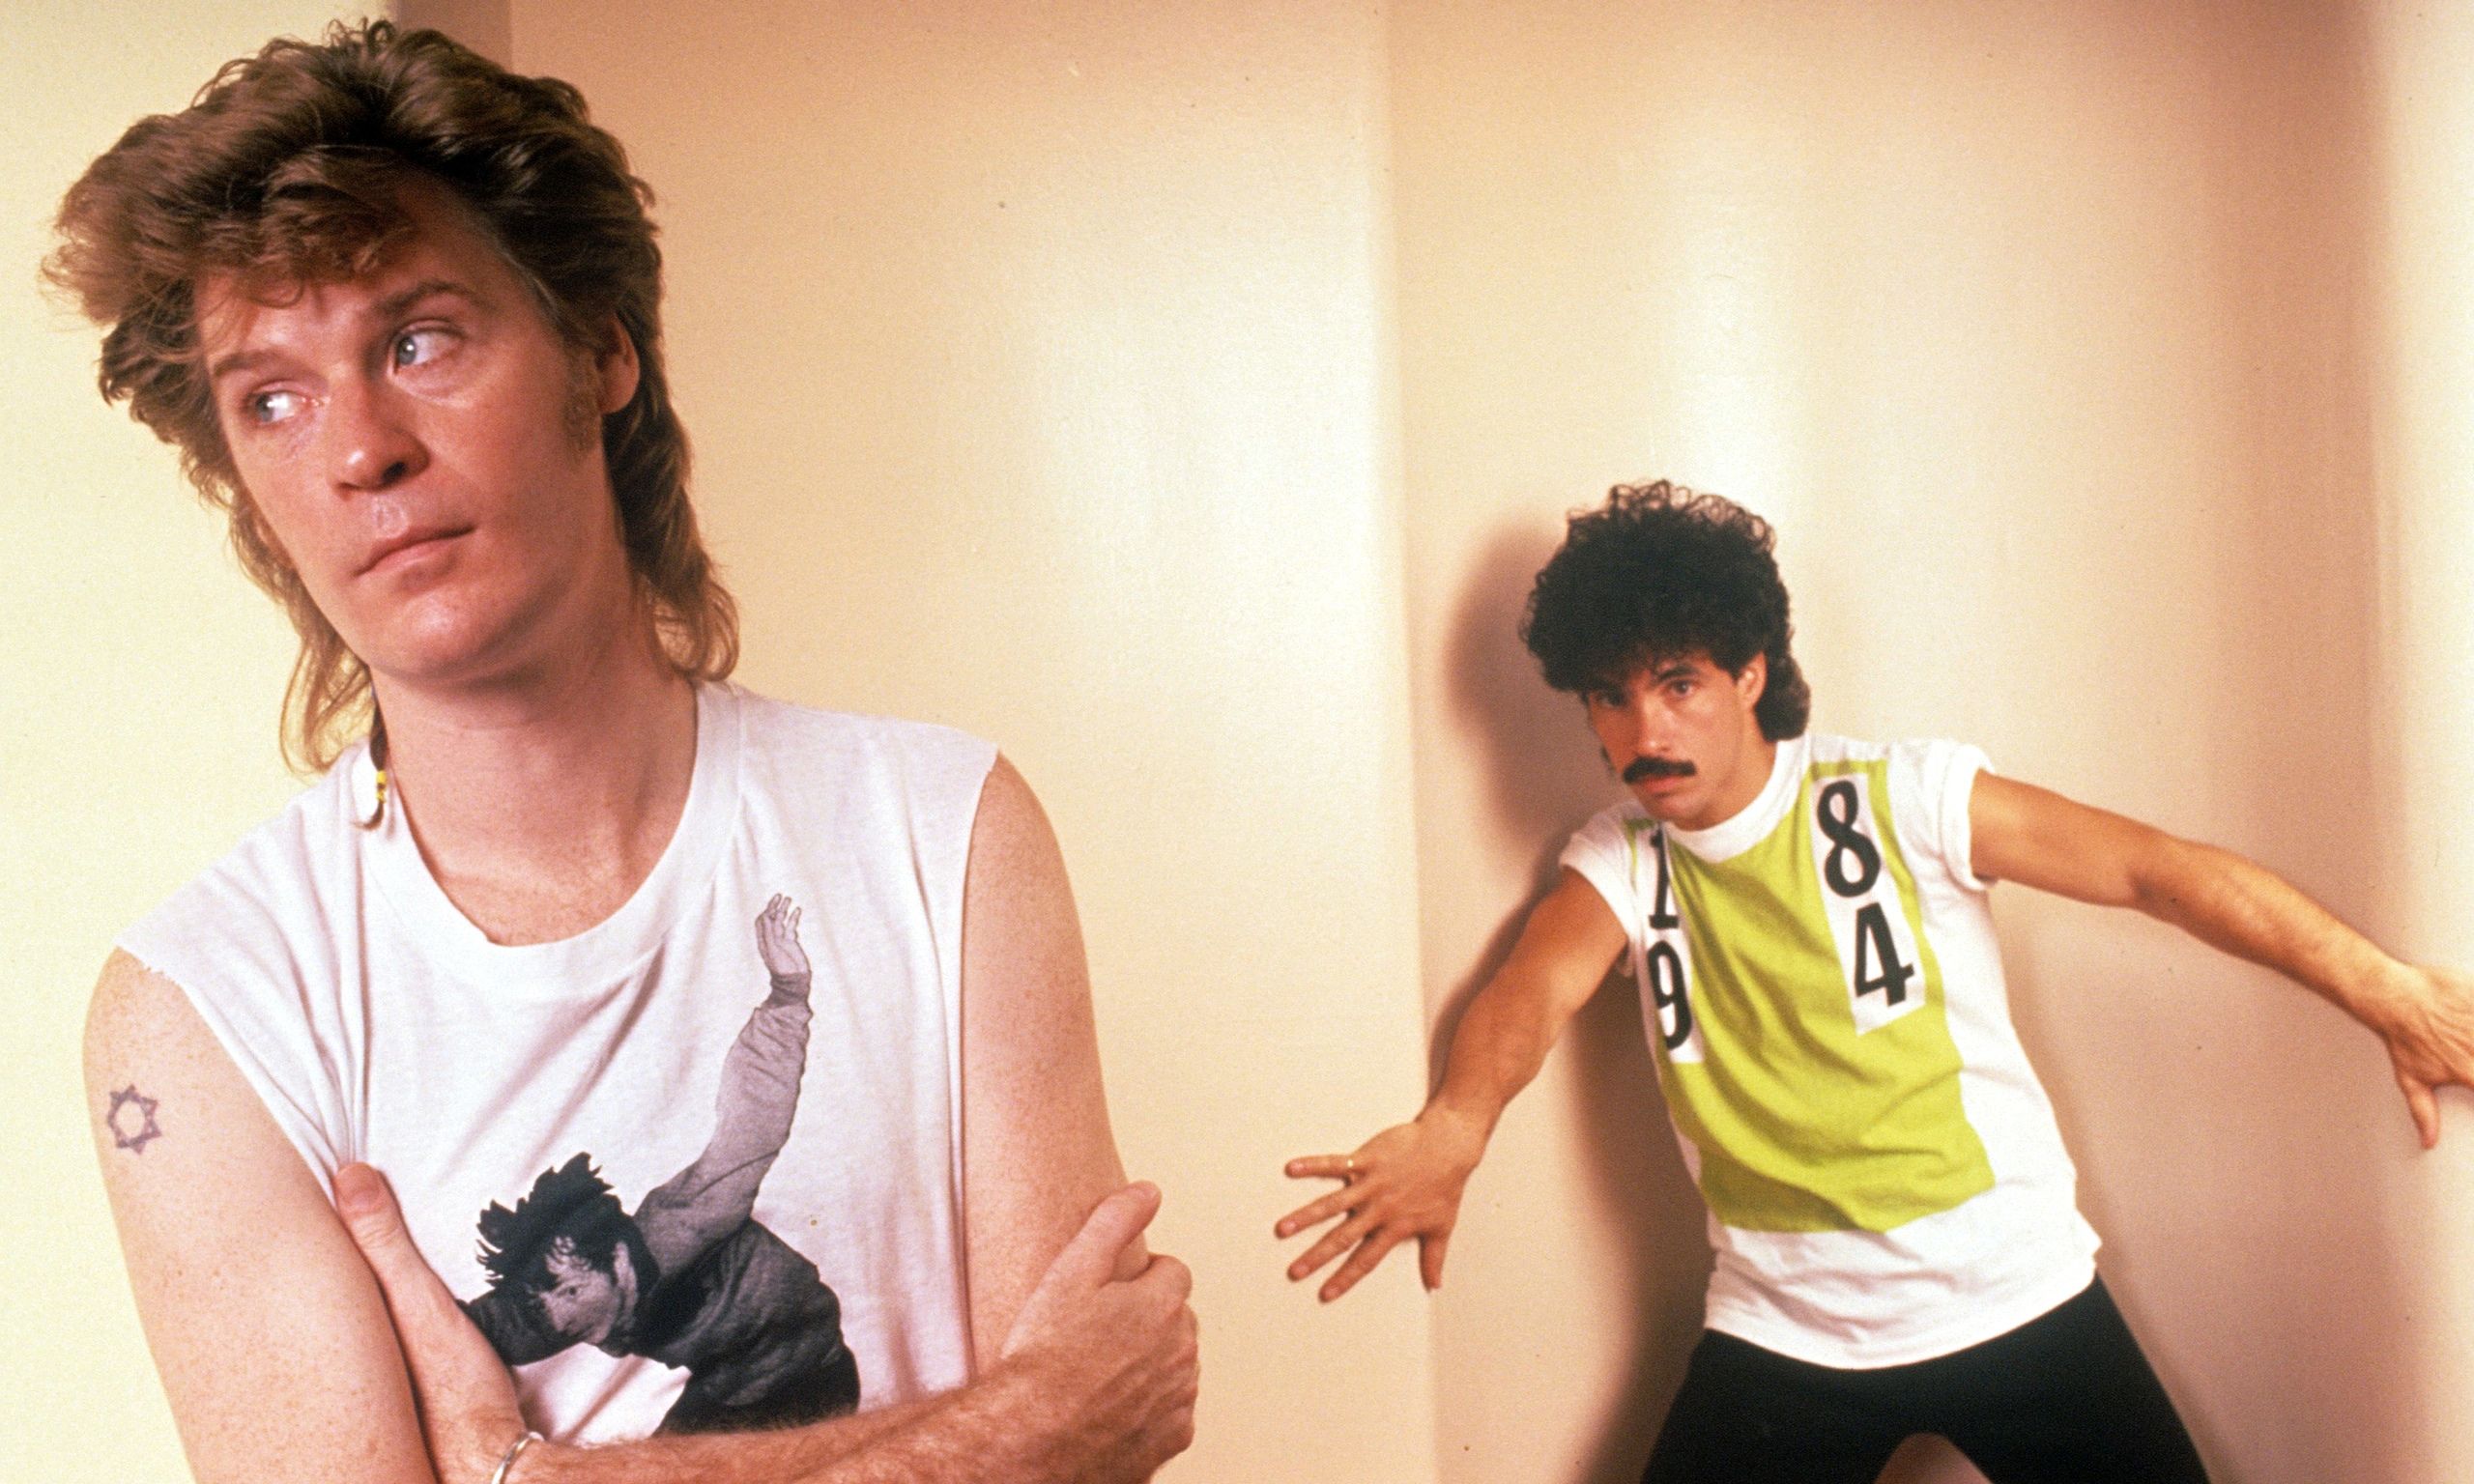 Hall & Oates Wallpaper. Hall & Oates Wallpaper, Sea Oates PowerPoint Background and Alicia Coates Wallpaper